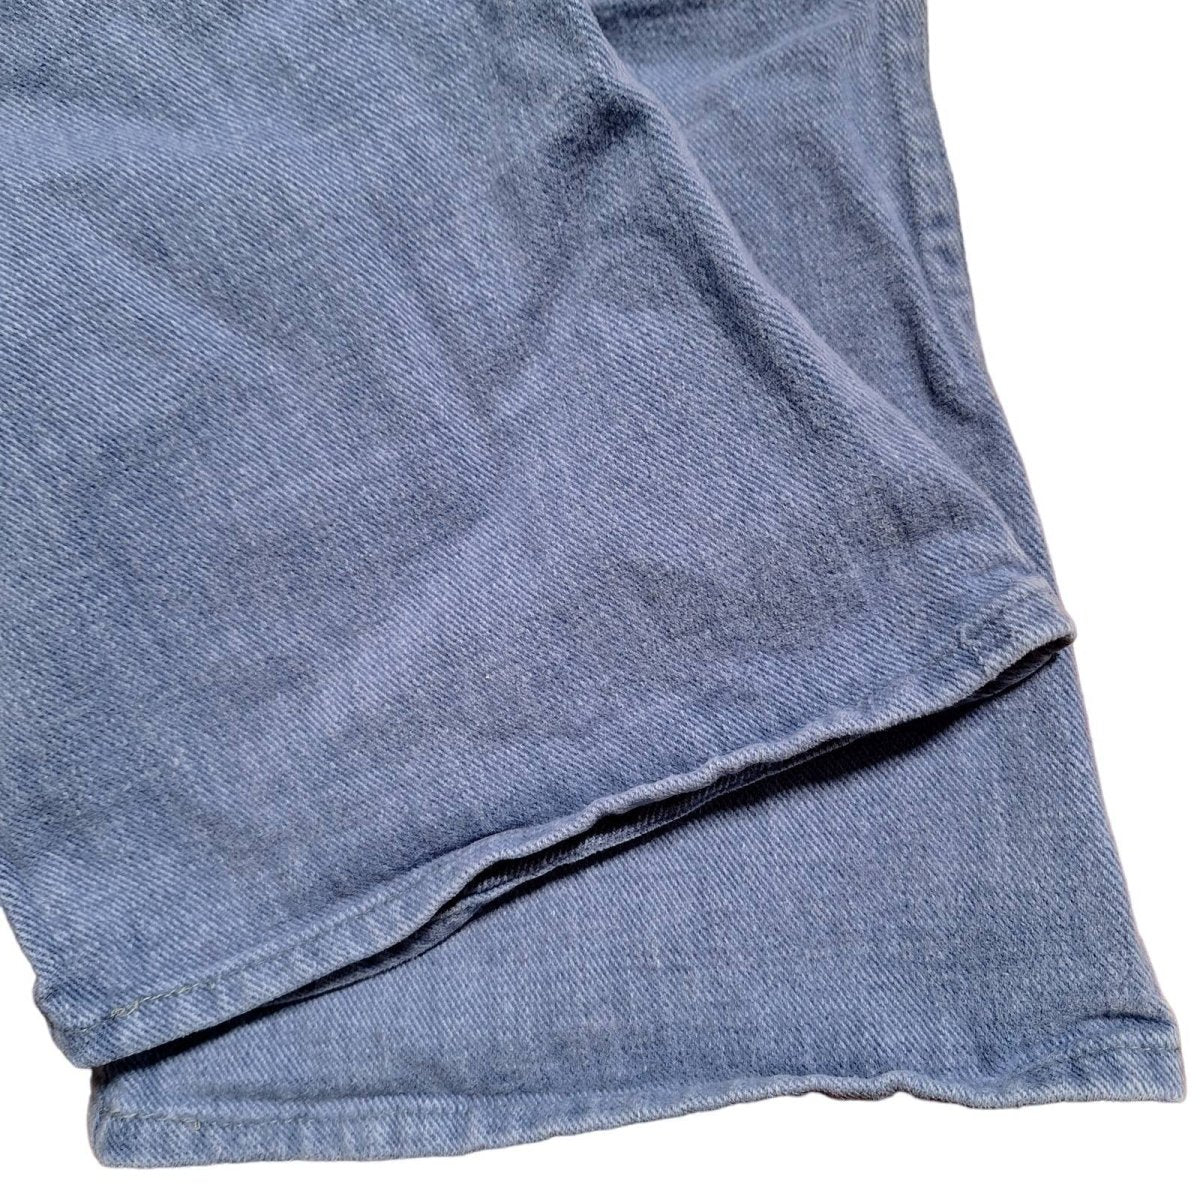 Vintage 70s Dusty Blue Denim Bellbottom Jeans Baby/Toddler Waist 17" to 22" Inseam 11" Length 18" - themallvintage The Mall Vintage